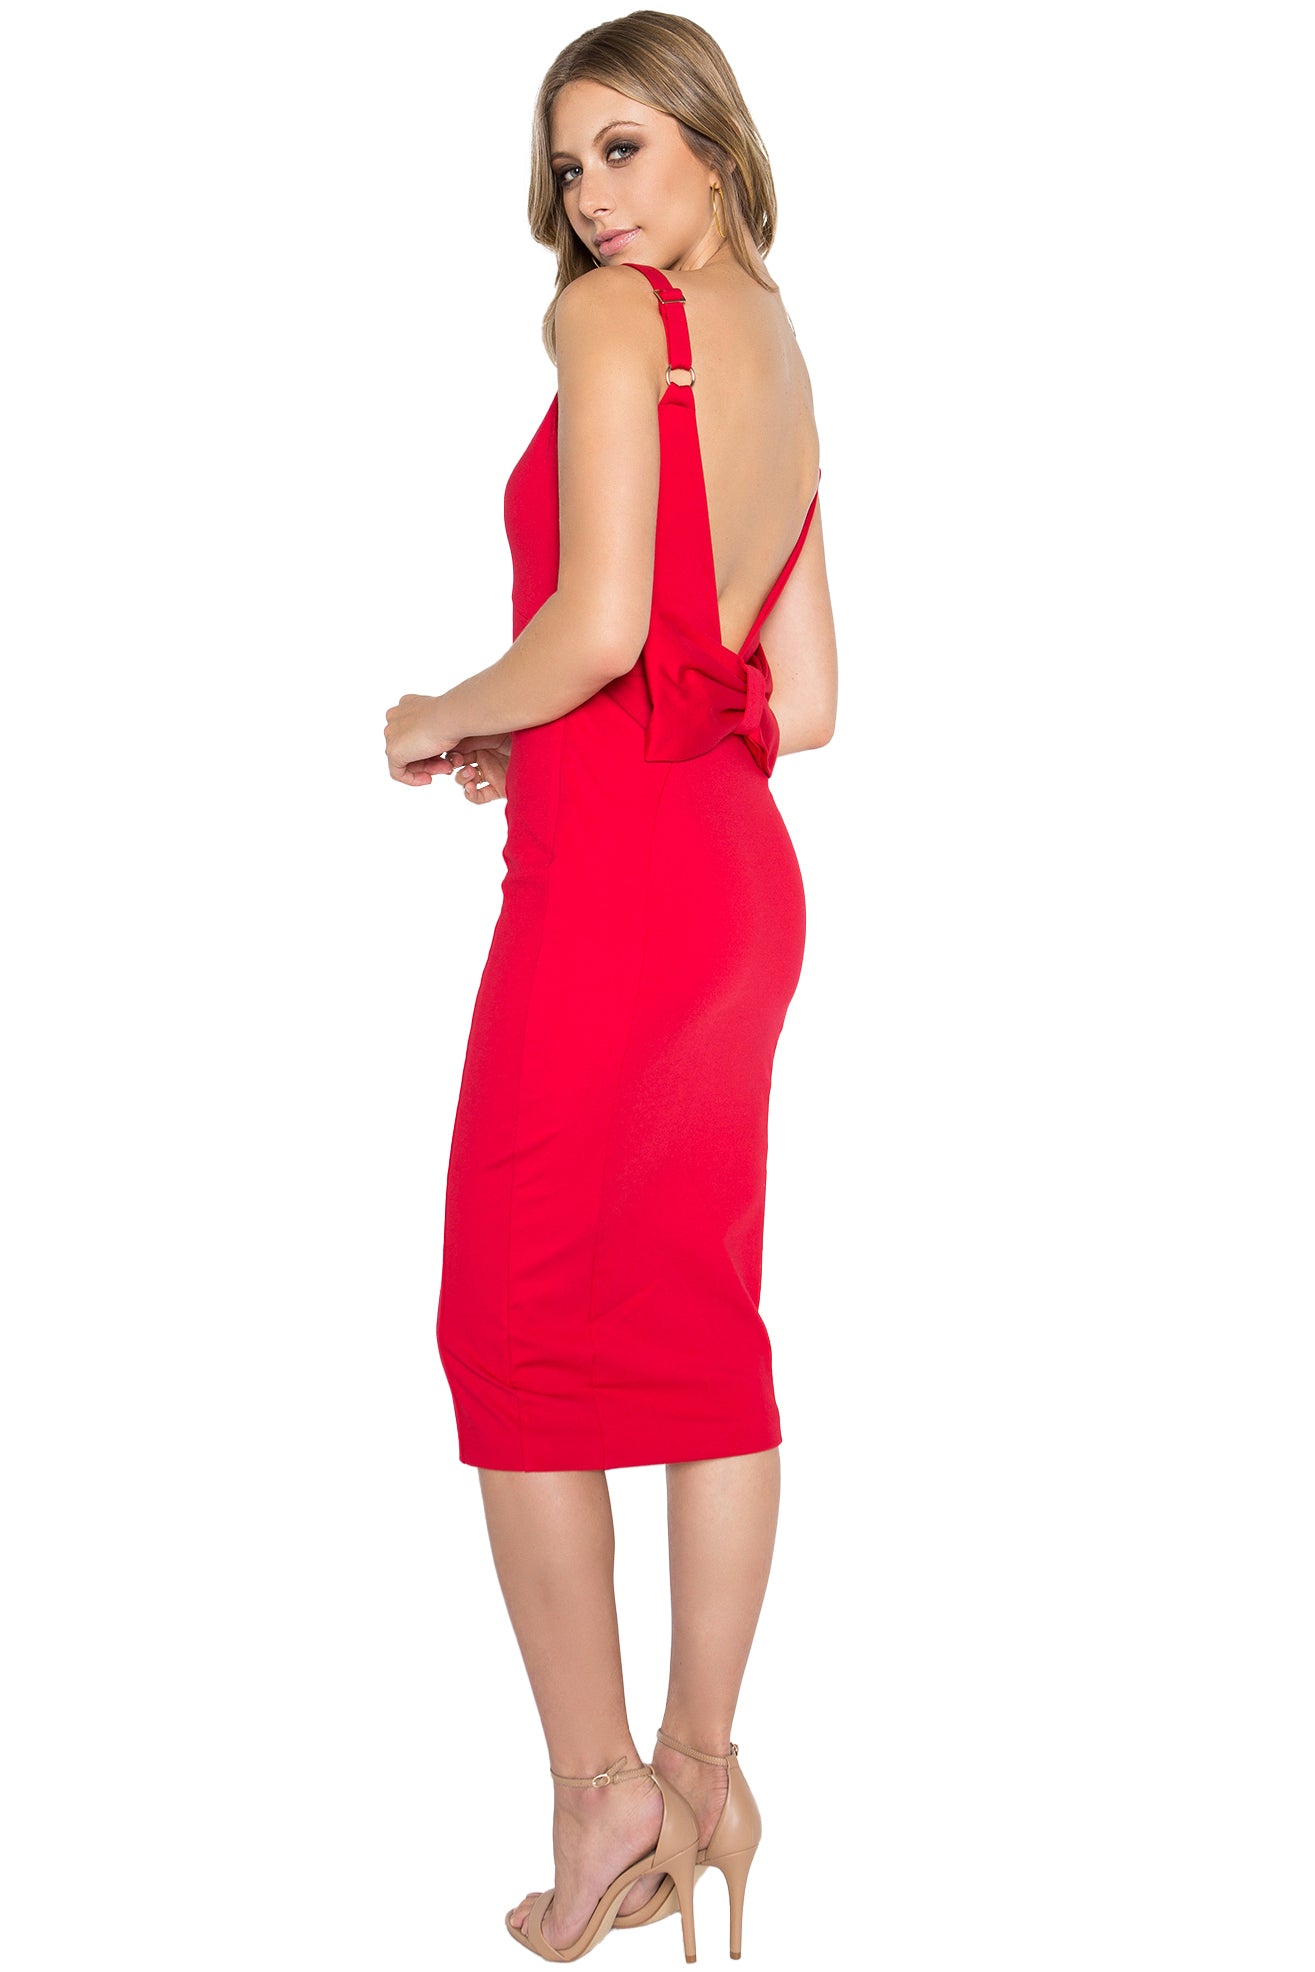 3/4 back view of model wearing the Simona Maghen Homa Dress, red midi knit Ponte sleeveless dress with adjustable straps, sweetheart neckline, low back, and large bow at back waist.